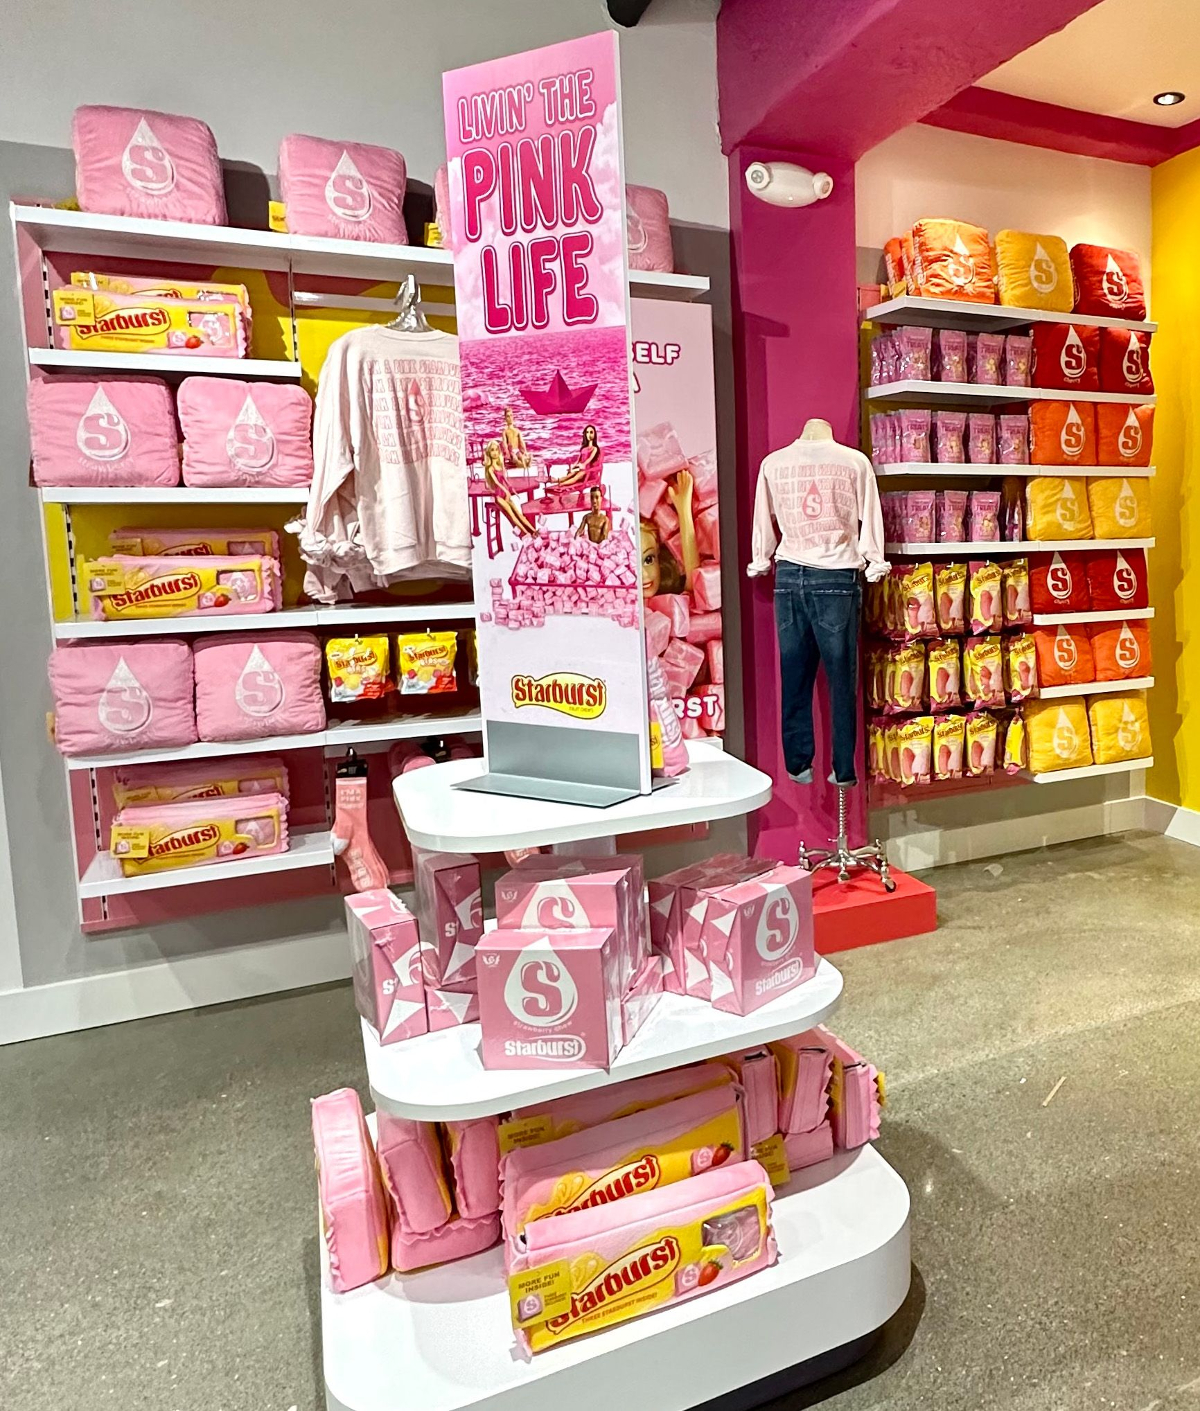 IT’SUGAR OPENS ITS LARGEST STORE IN SAN FRANCISCO’S FISHERMAN’S WHARF